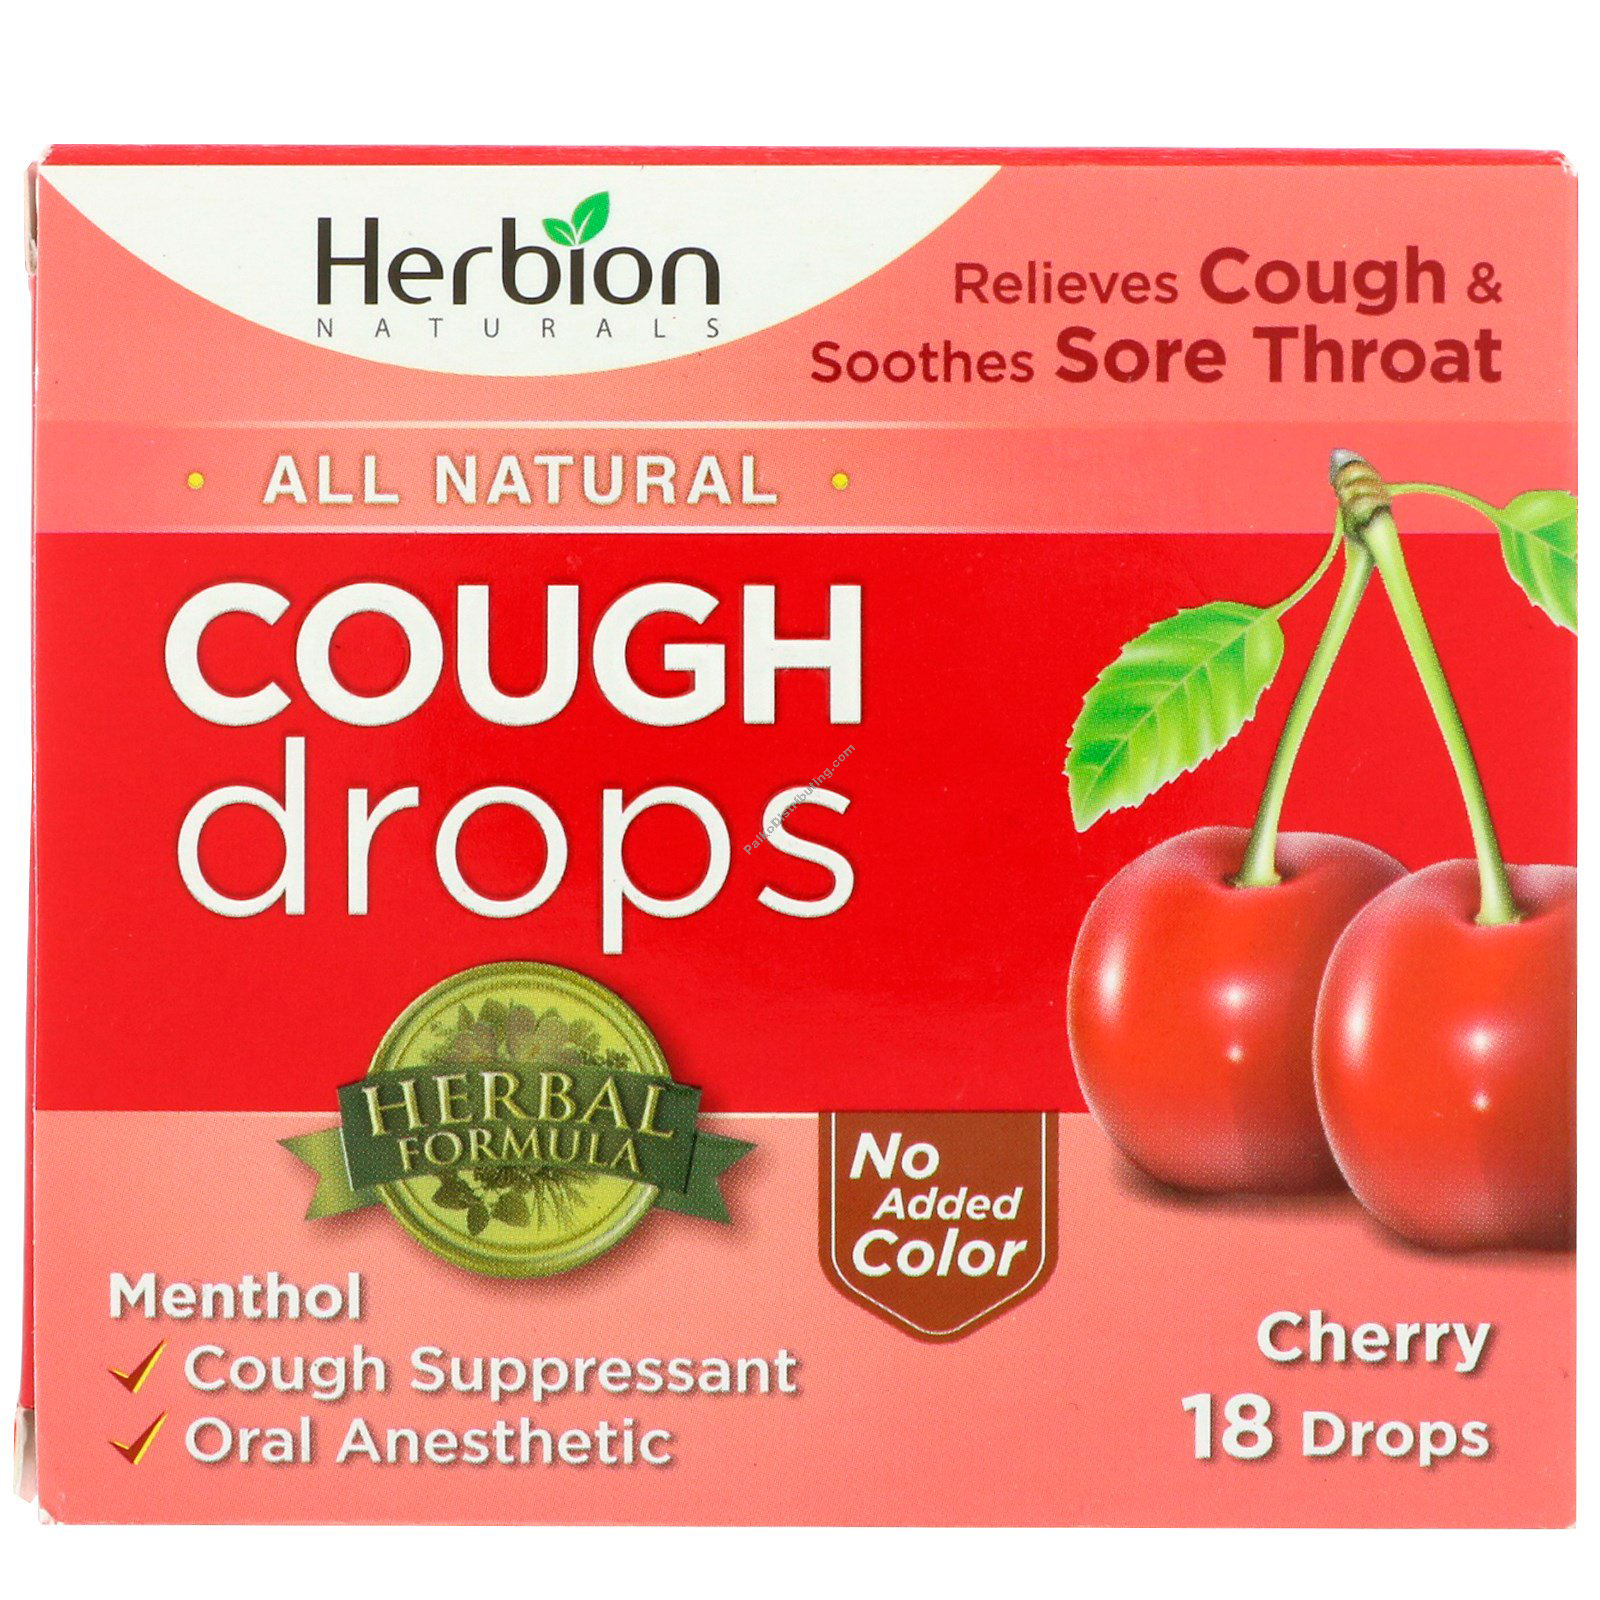 Product Image: Cherry Cough Drops